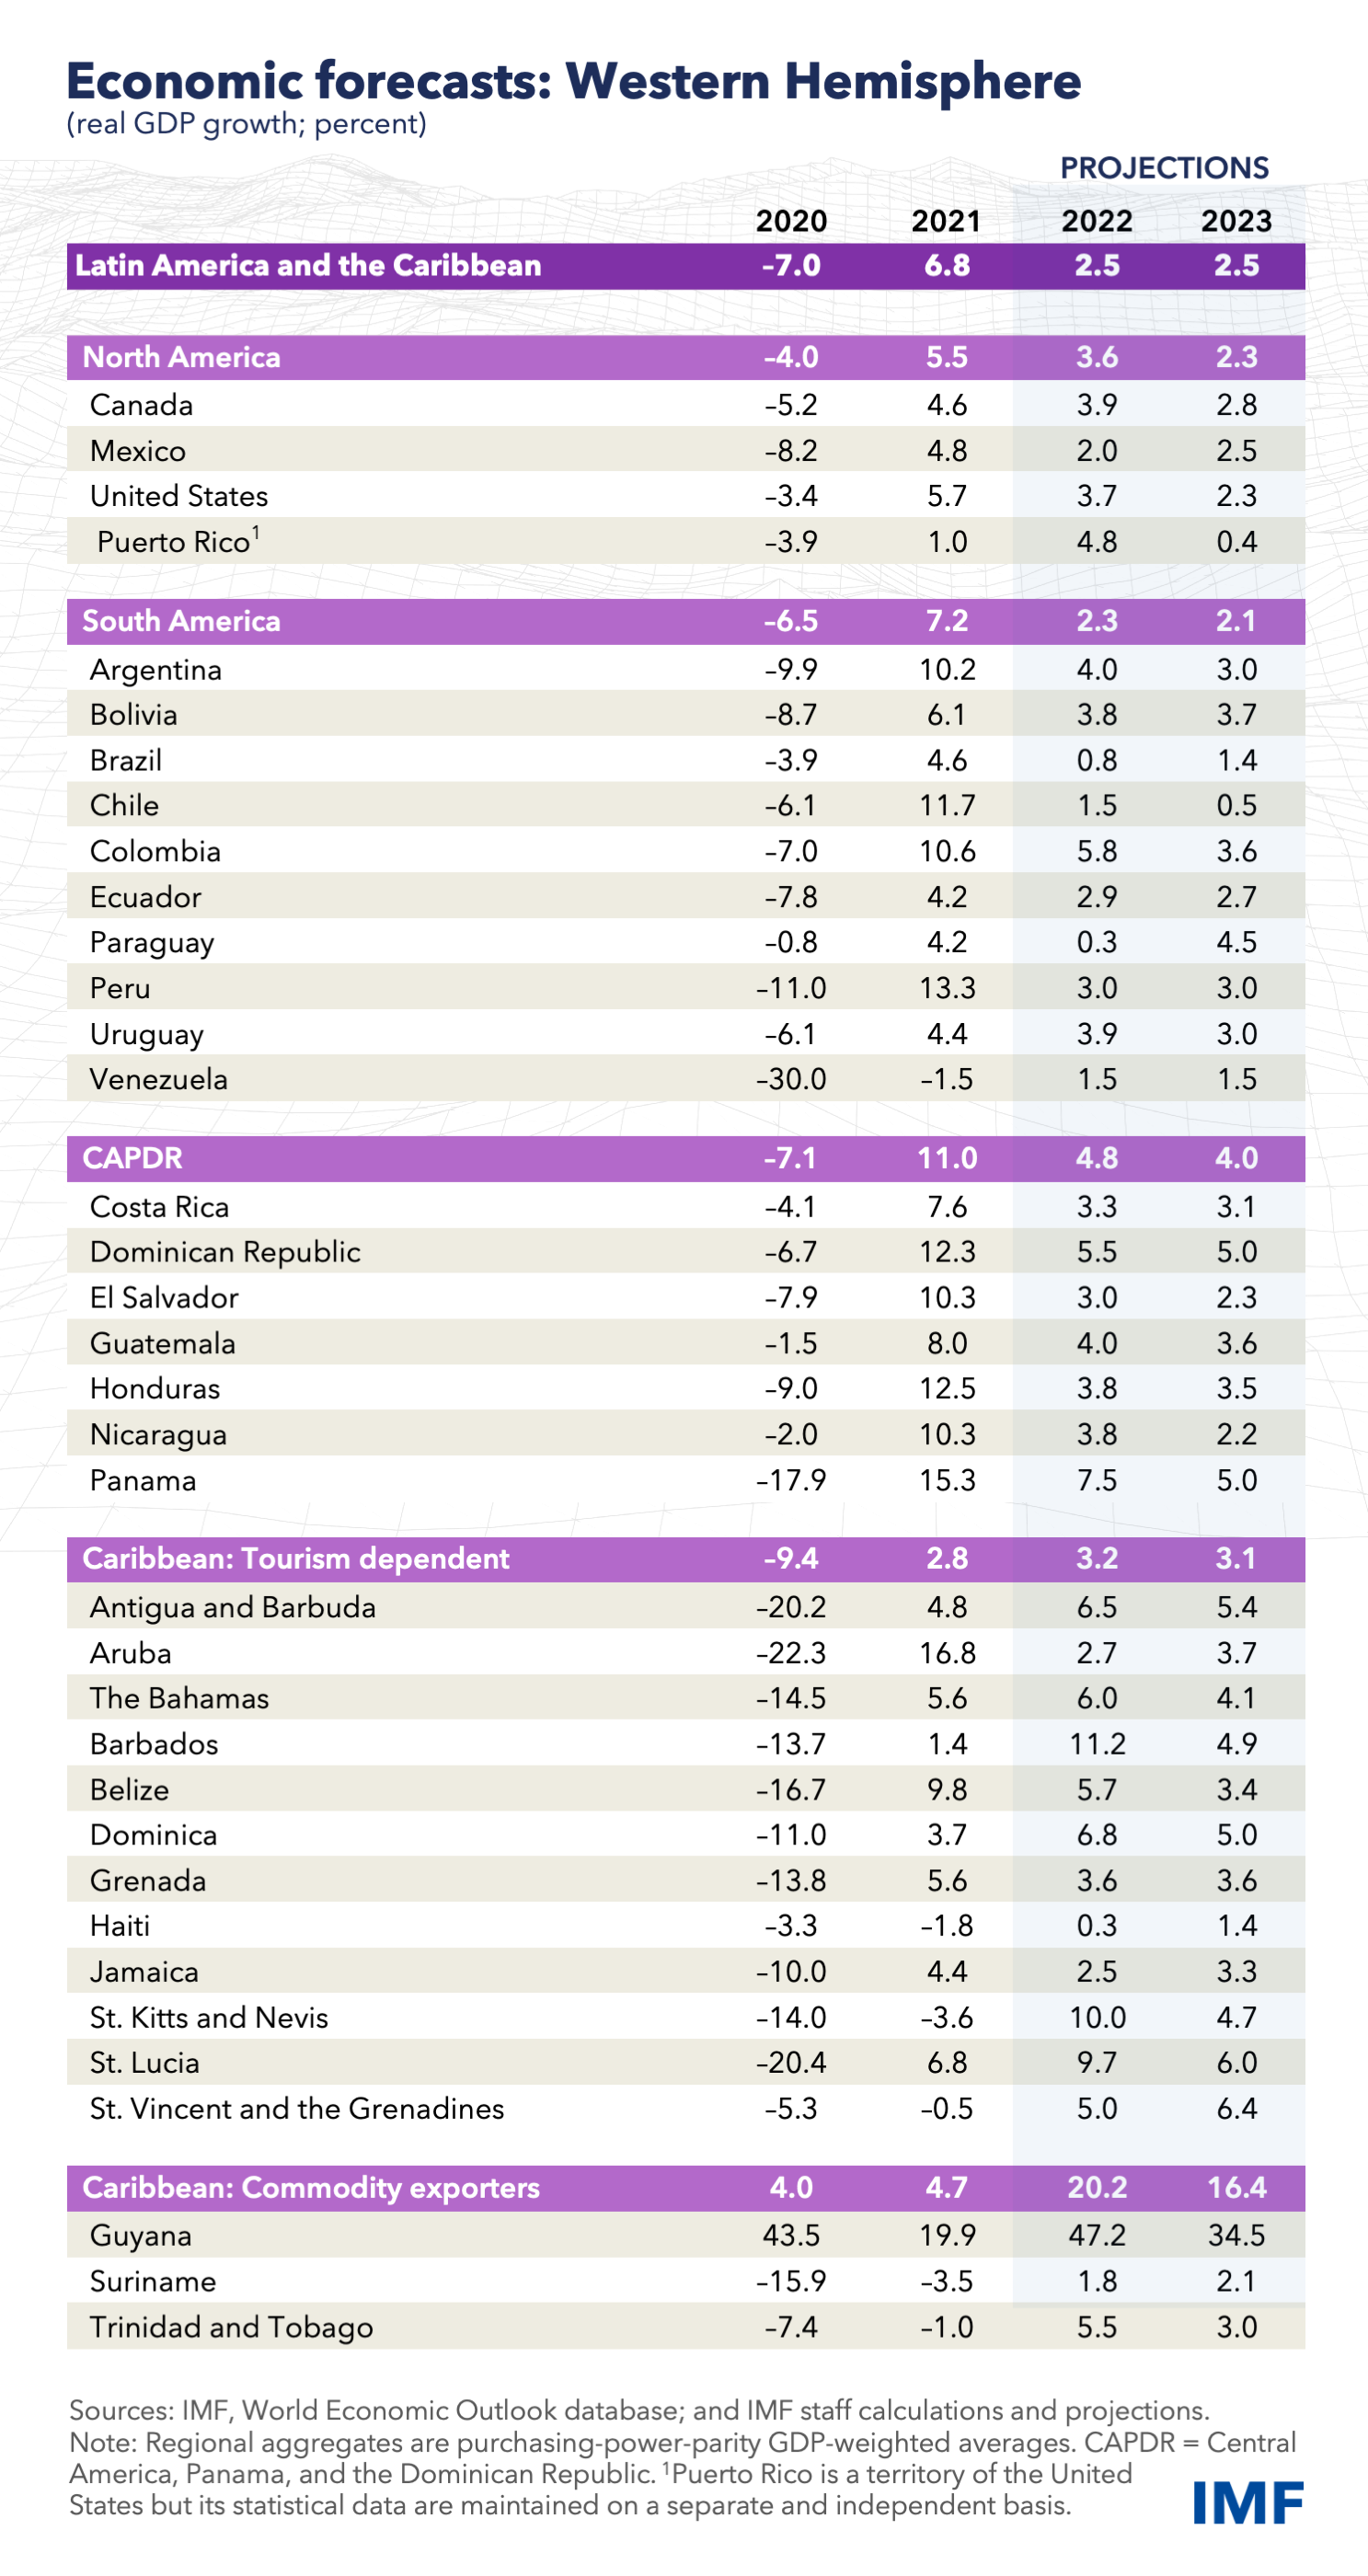 Western Hemisphere Economic Outlook - April 2022: Projections Table